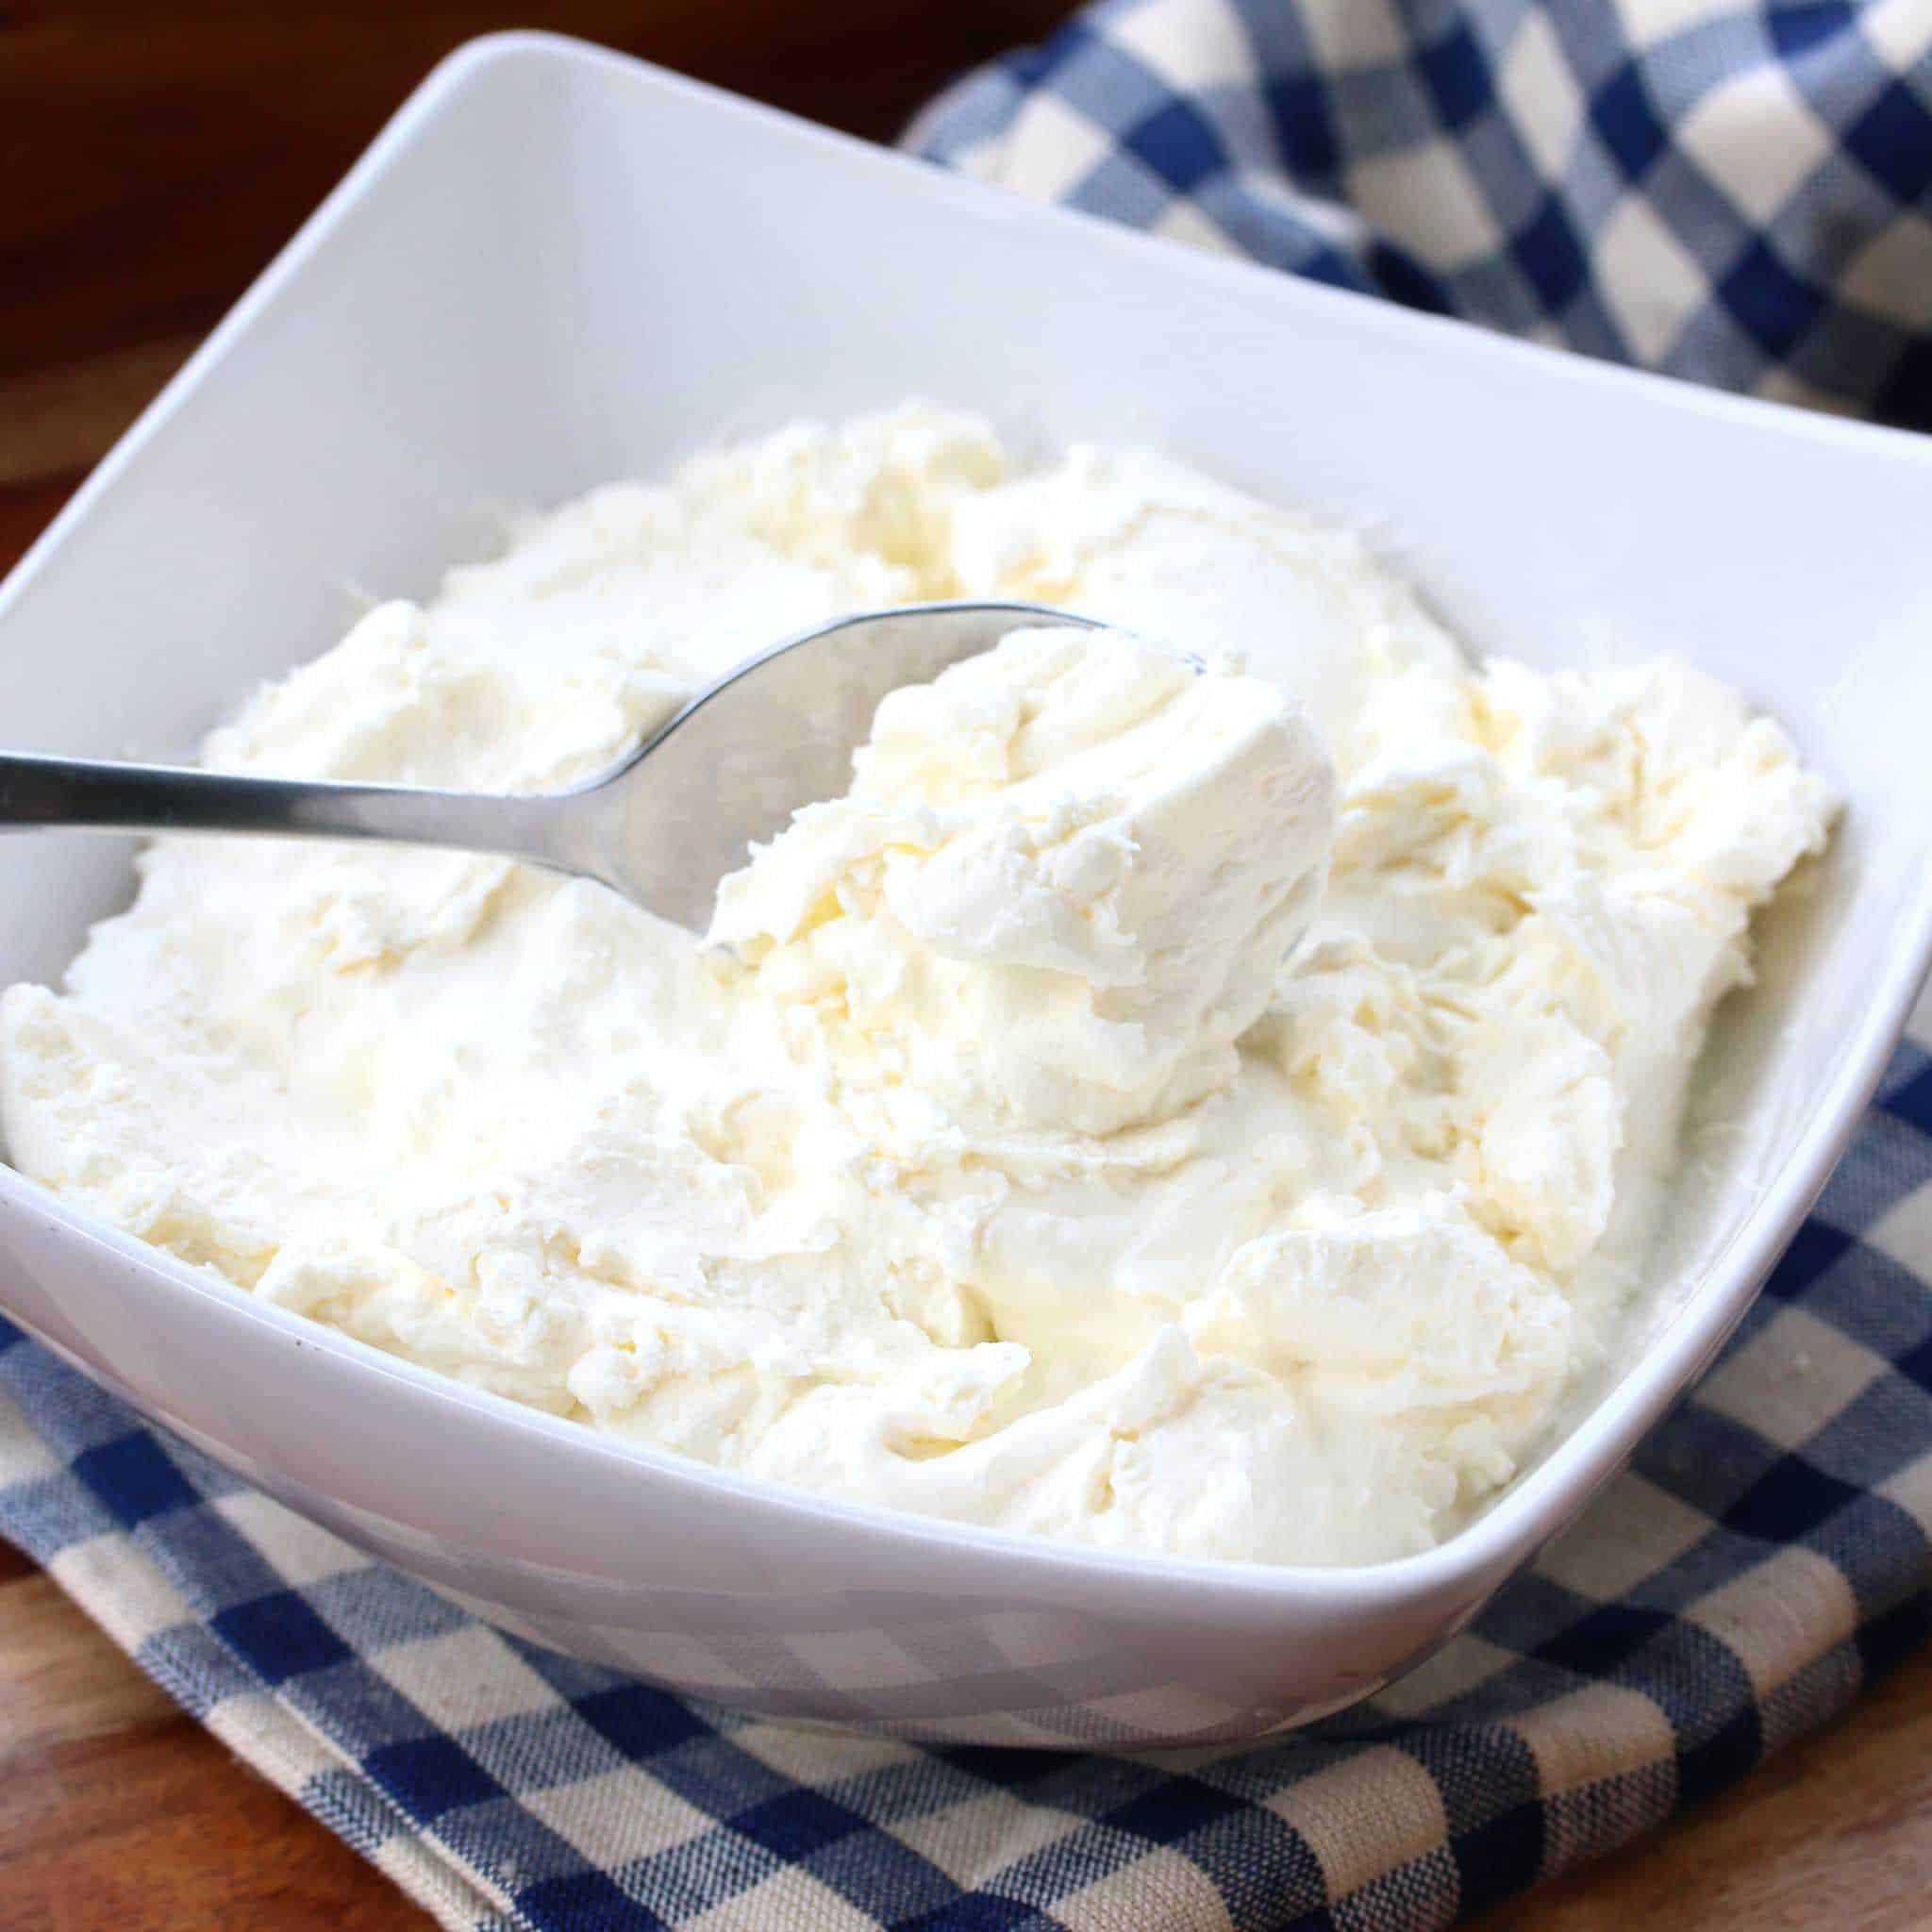 How To Make Mascarpone Foolproof Recipe The Daring Gourmet,What Is Lukewarm Water